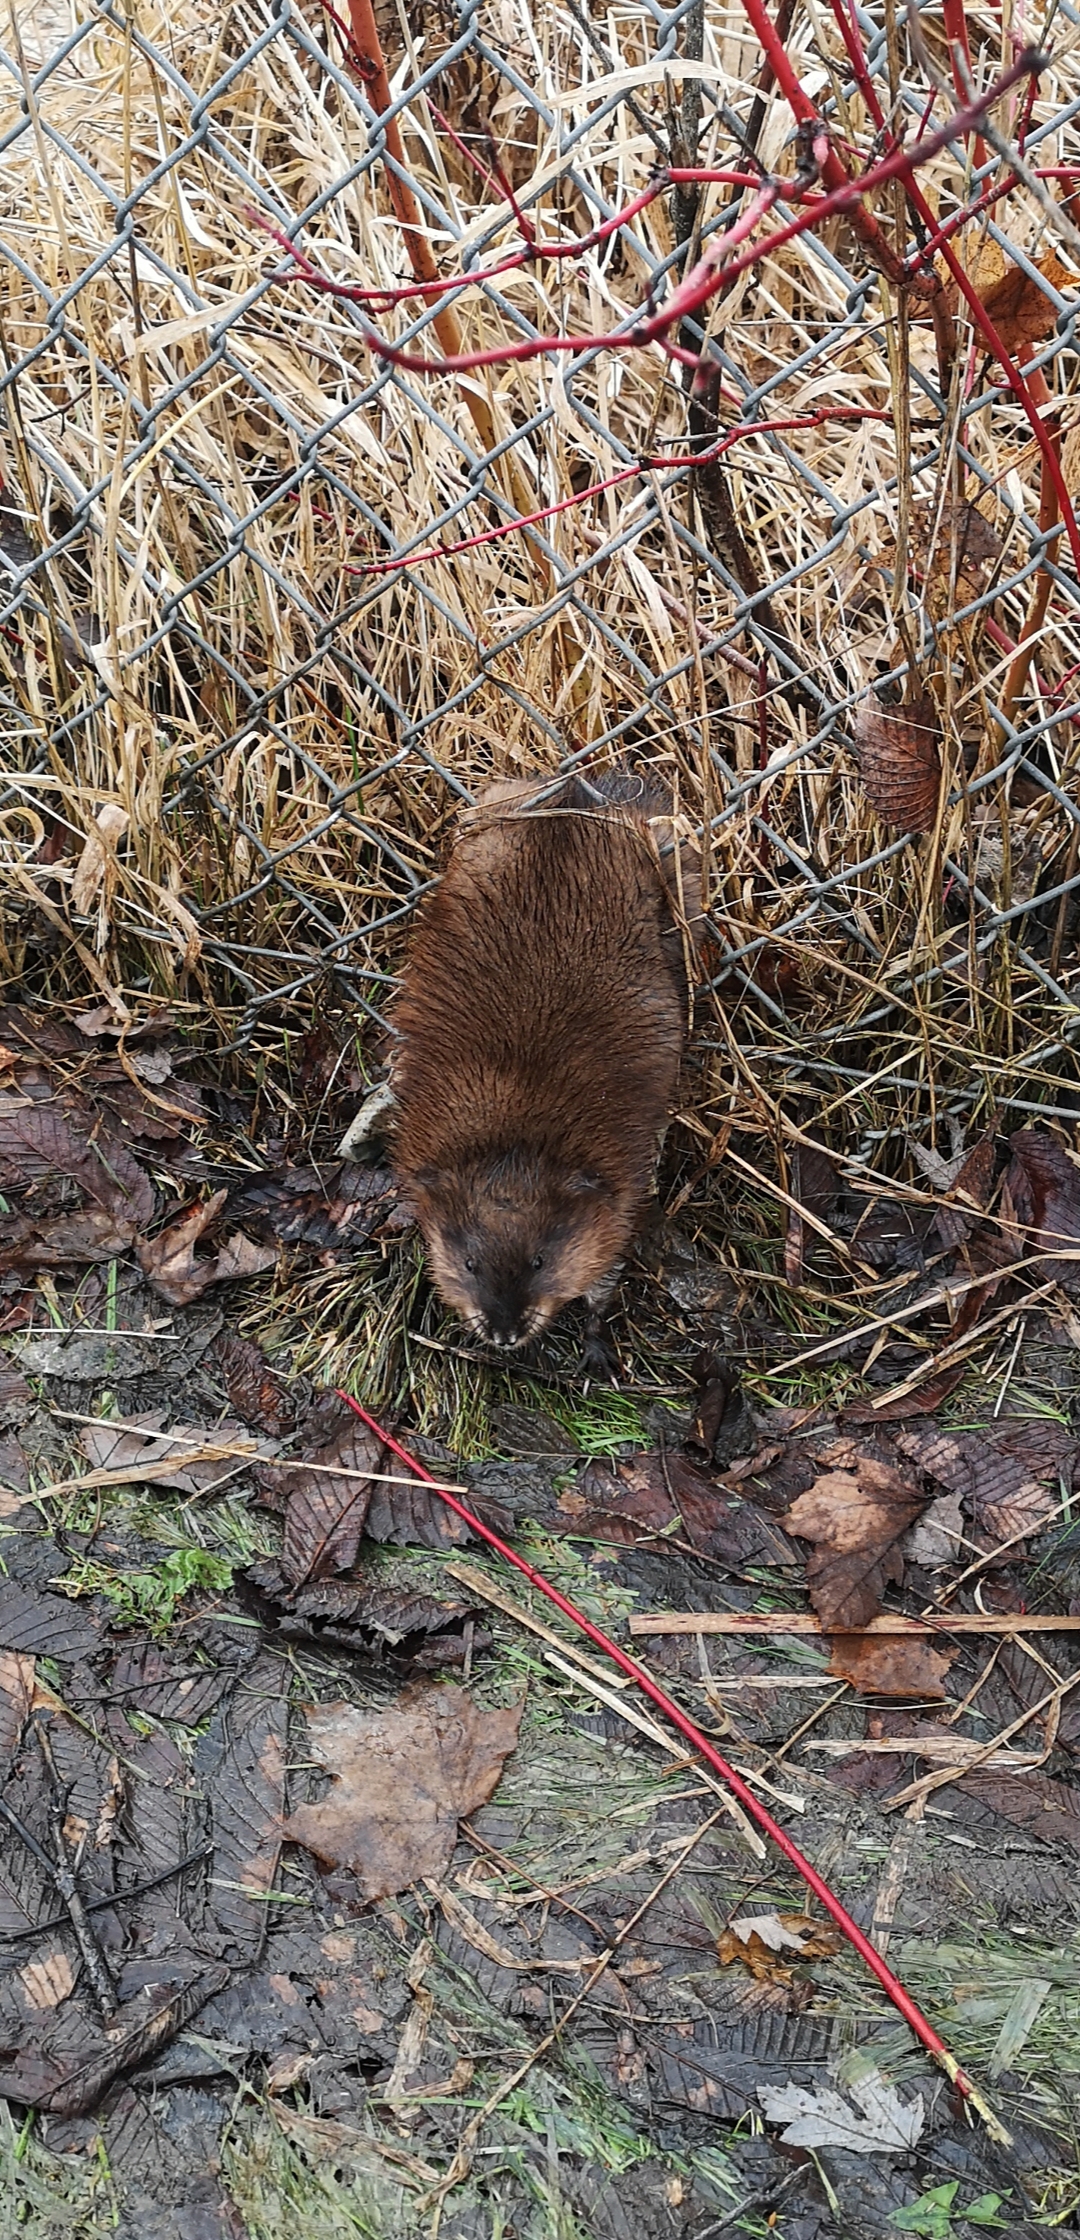 Good news story: Muskrat rescue - Ontario SPCA and Humane Society